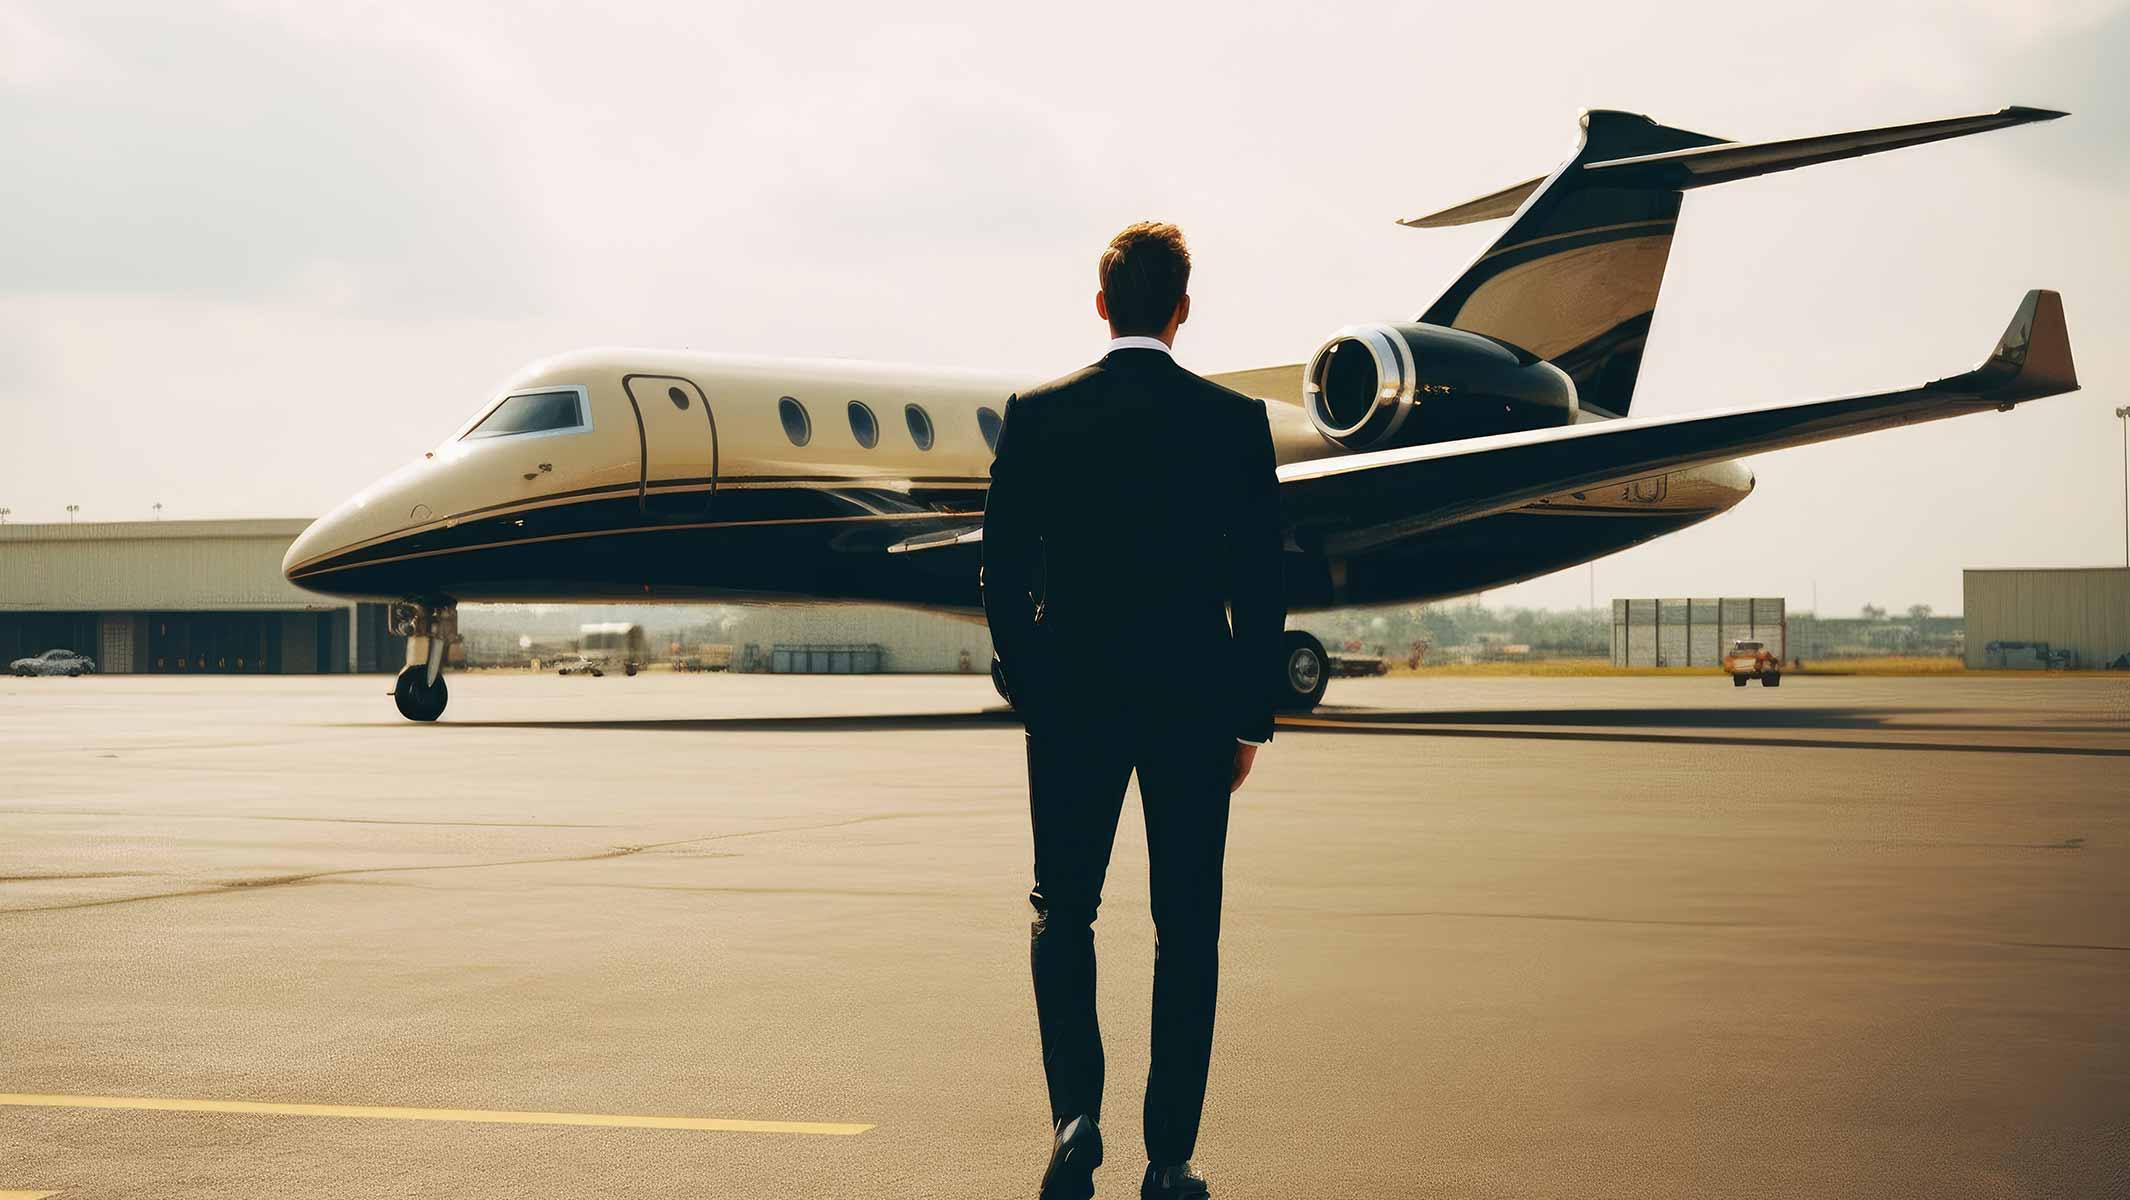 SLJ - Starr Luxury Jets, Live the Platinum -Hire a Private Jet Experience - Ibiza, Spain Airport - Book your Private Jet in UK, Mayfair, Berkeley Square